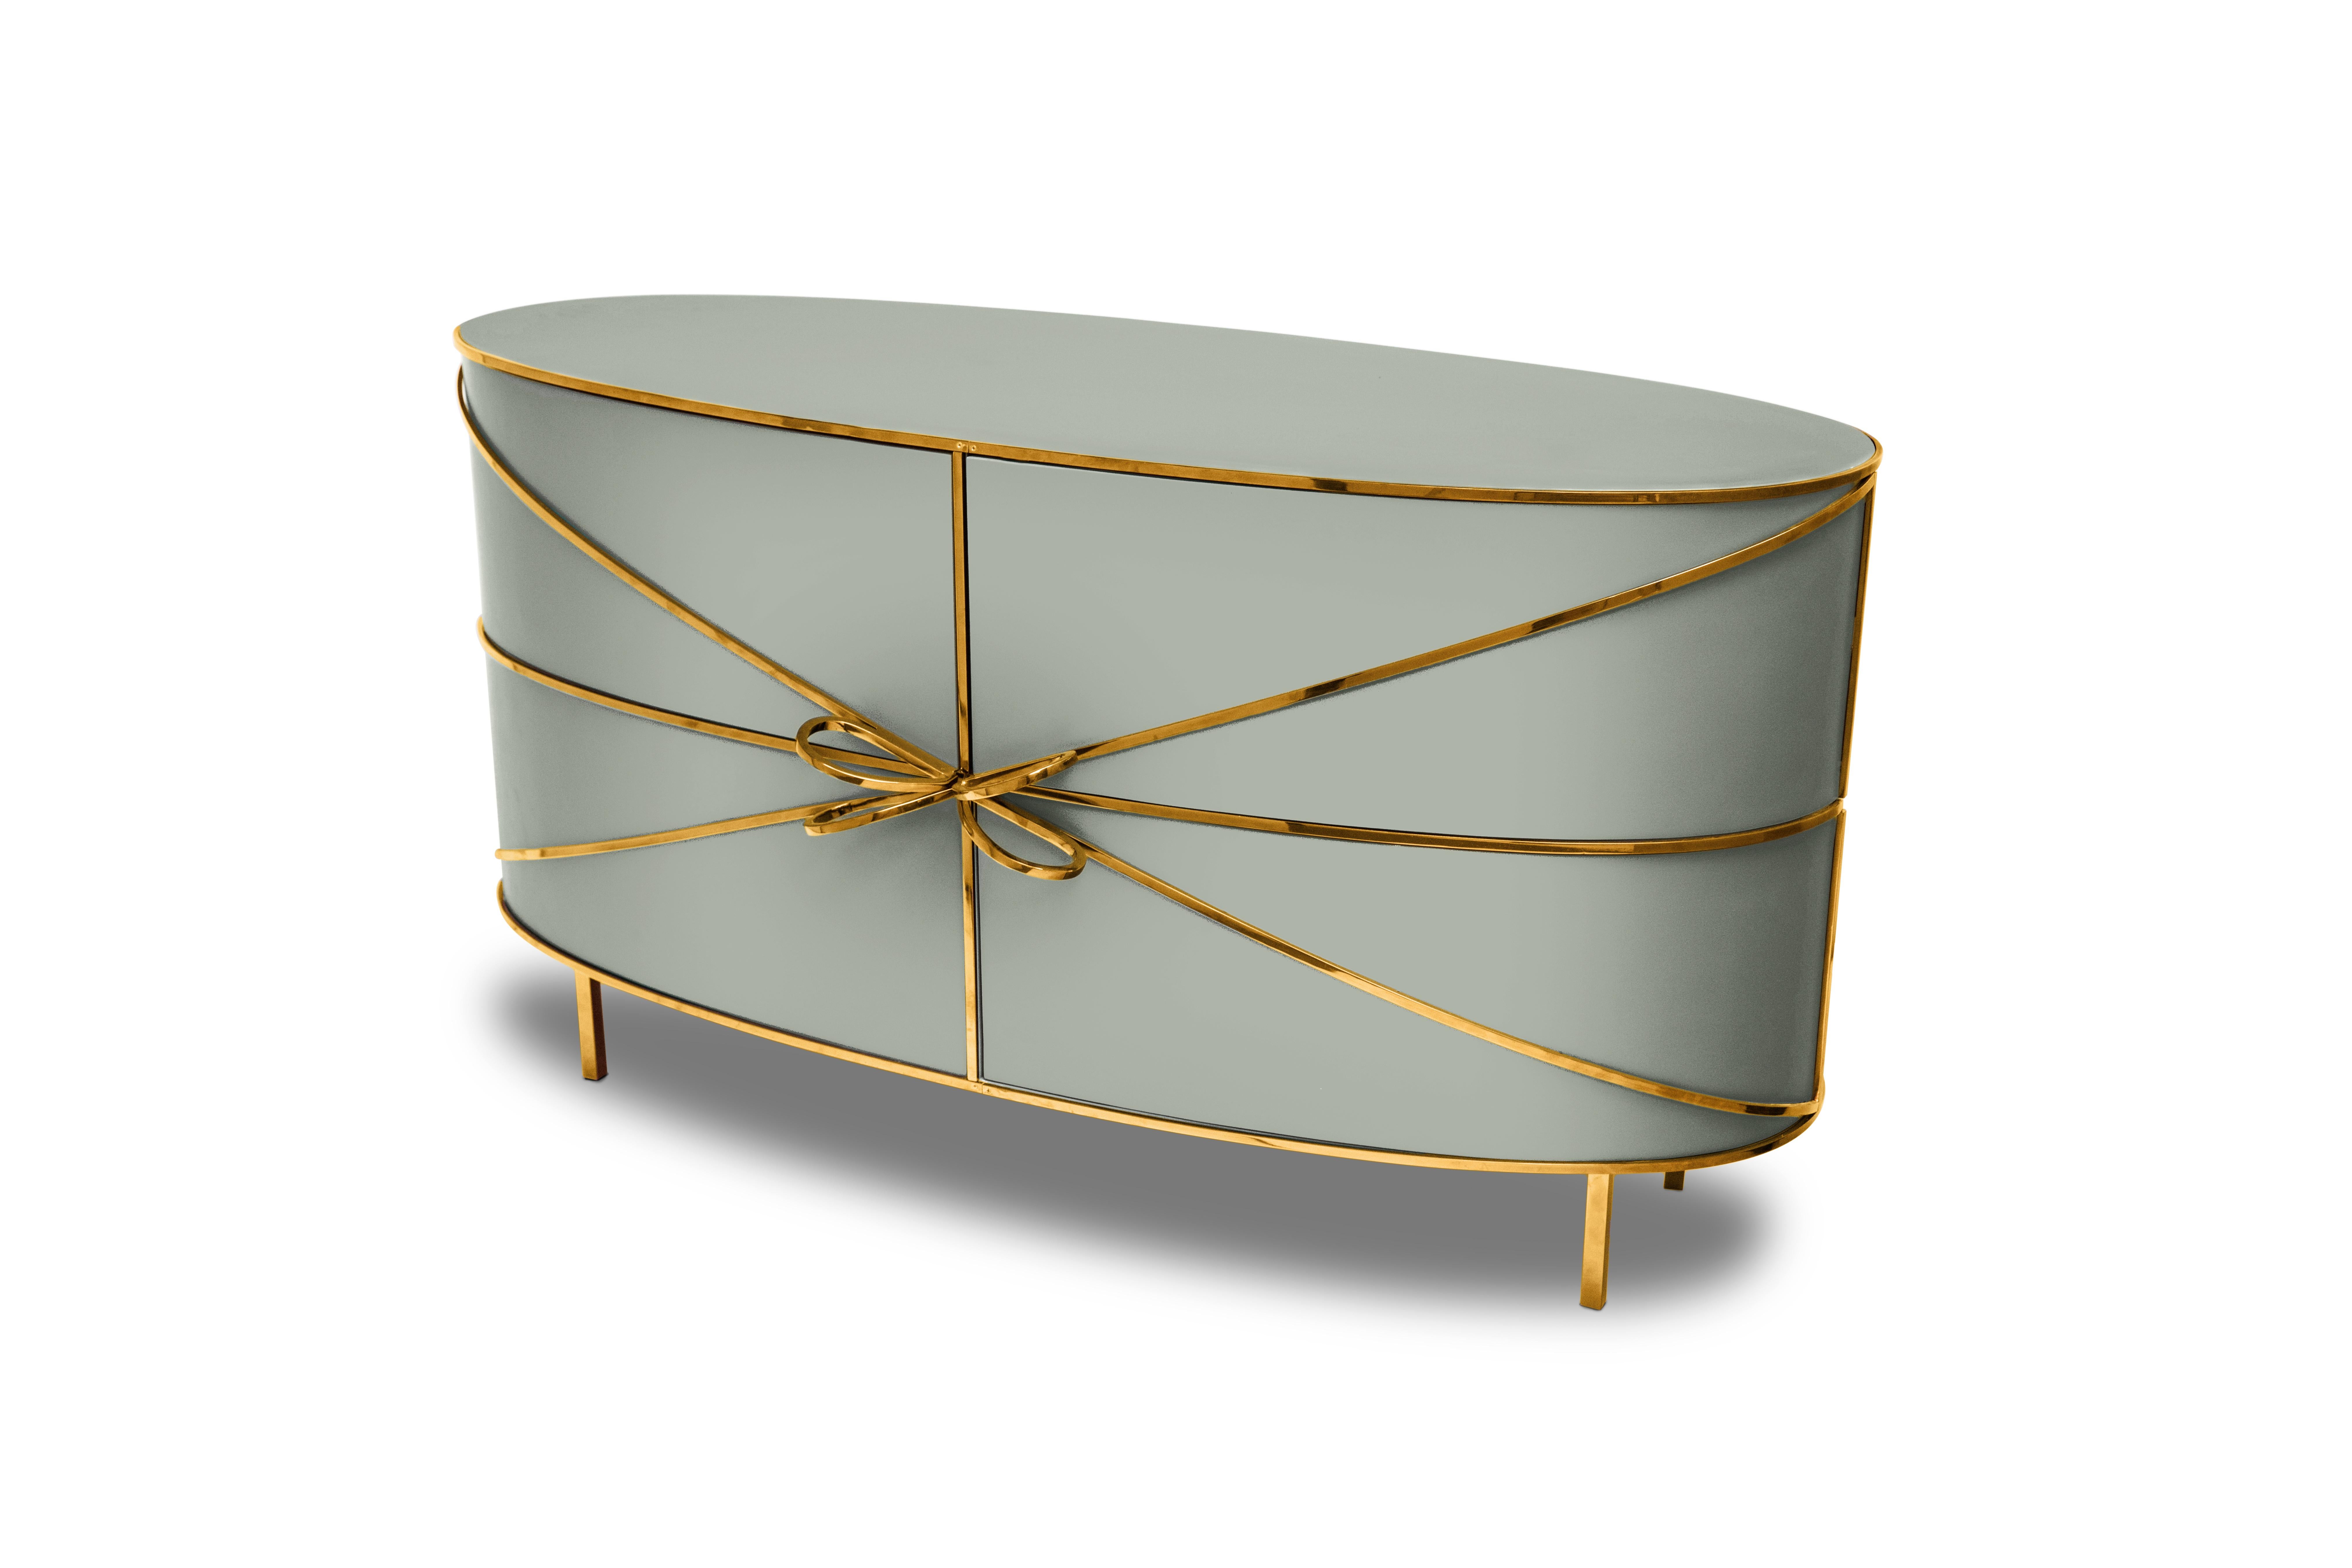 88 Secrets Gray Sideboard with Gold Trims by Nika Zupanc is a chic gray cabinet in sensuous, feminine lines with luxurious gold metal trims. A statement piece in any interior space!

Nika Zupanc, a strikingly renowned Slovenian designer, never shies